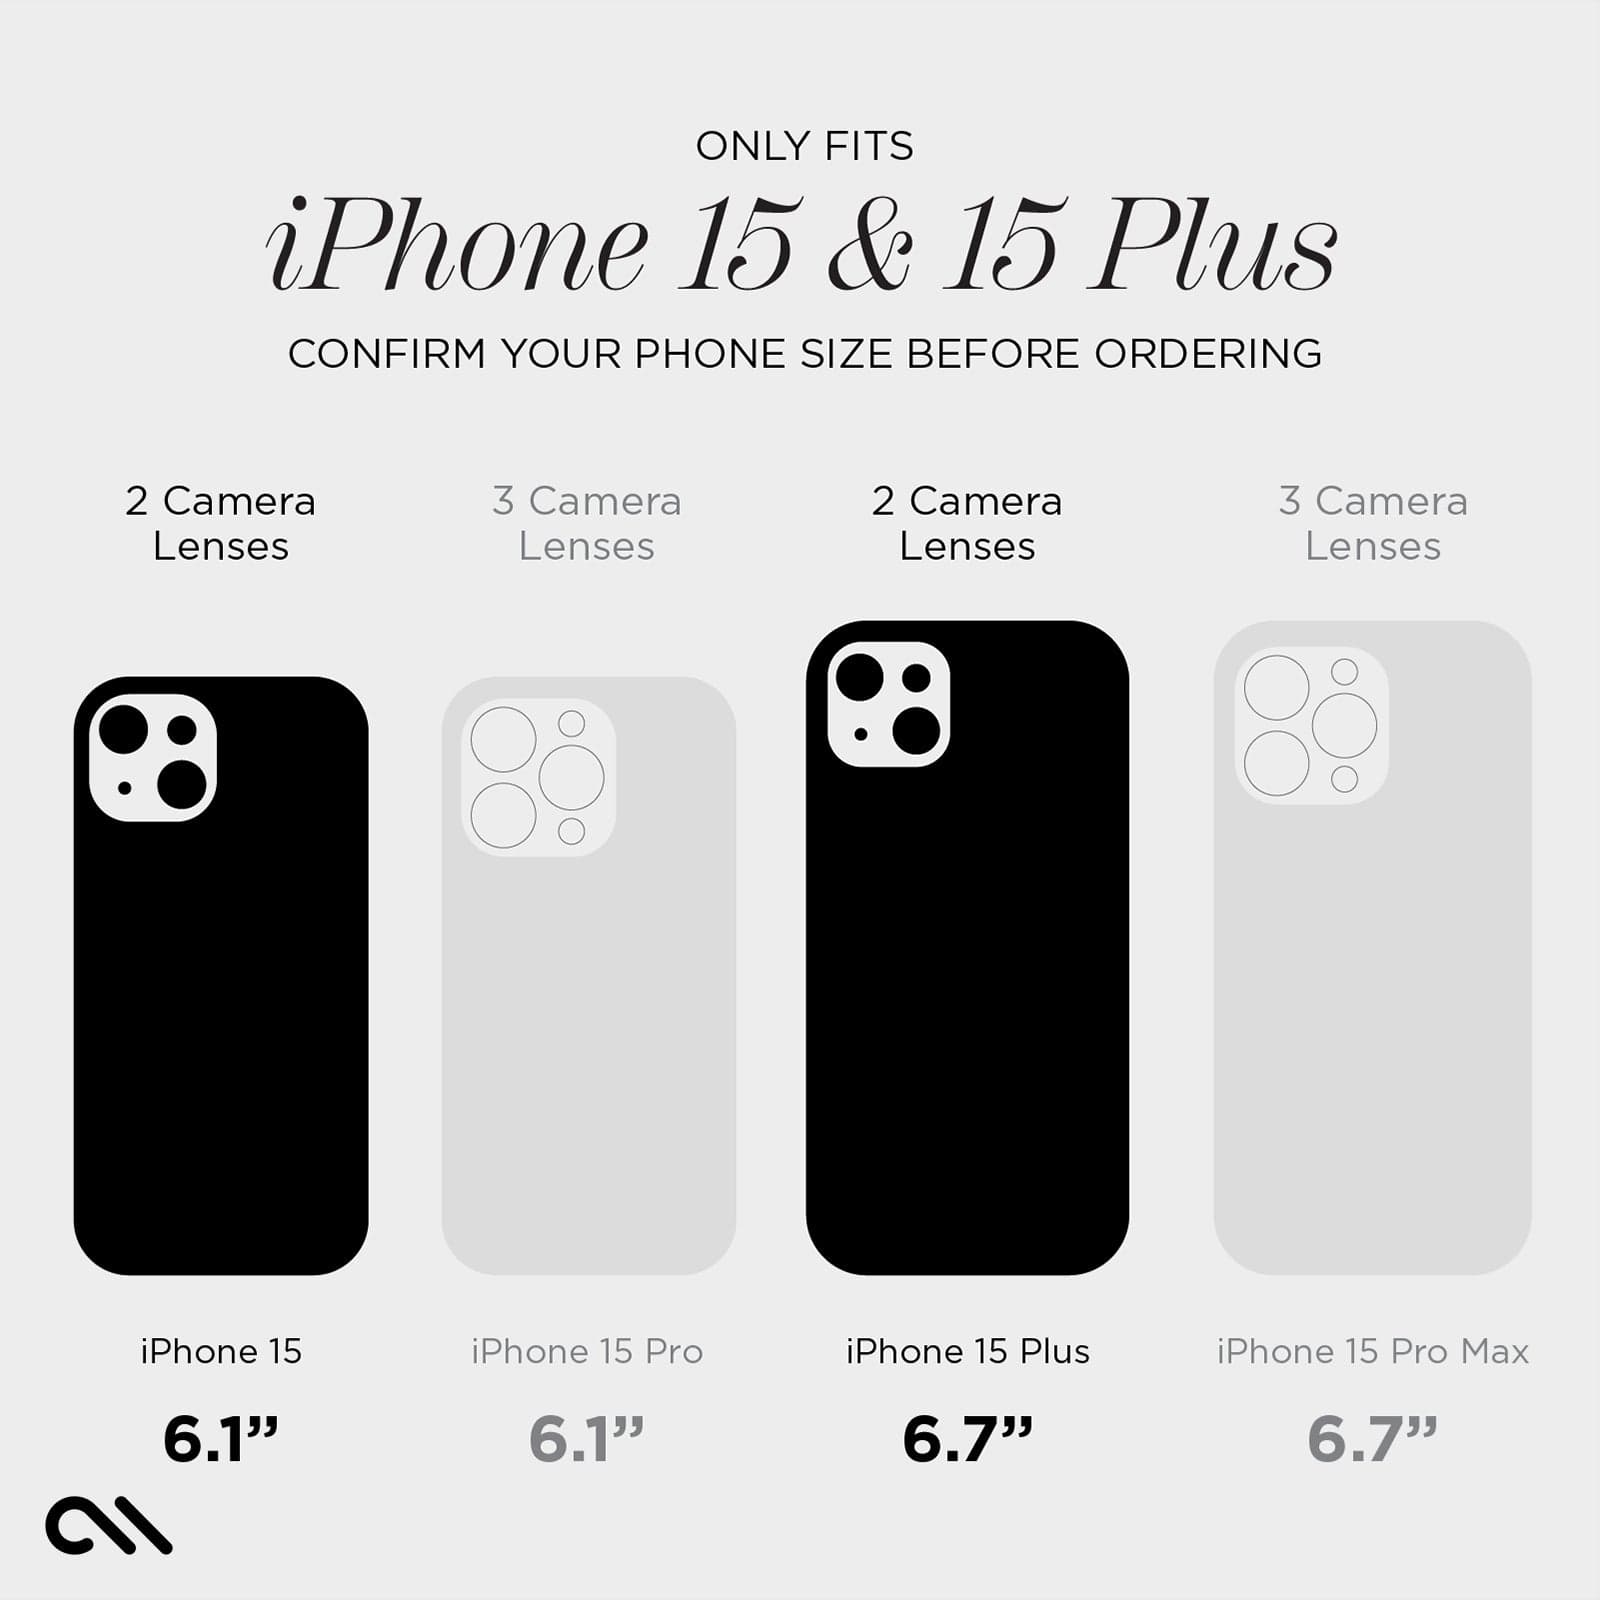 ONLY FITS IPHONE 15 AND 15 PLUS